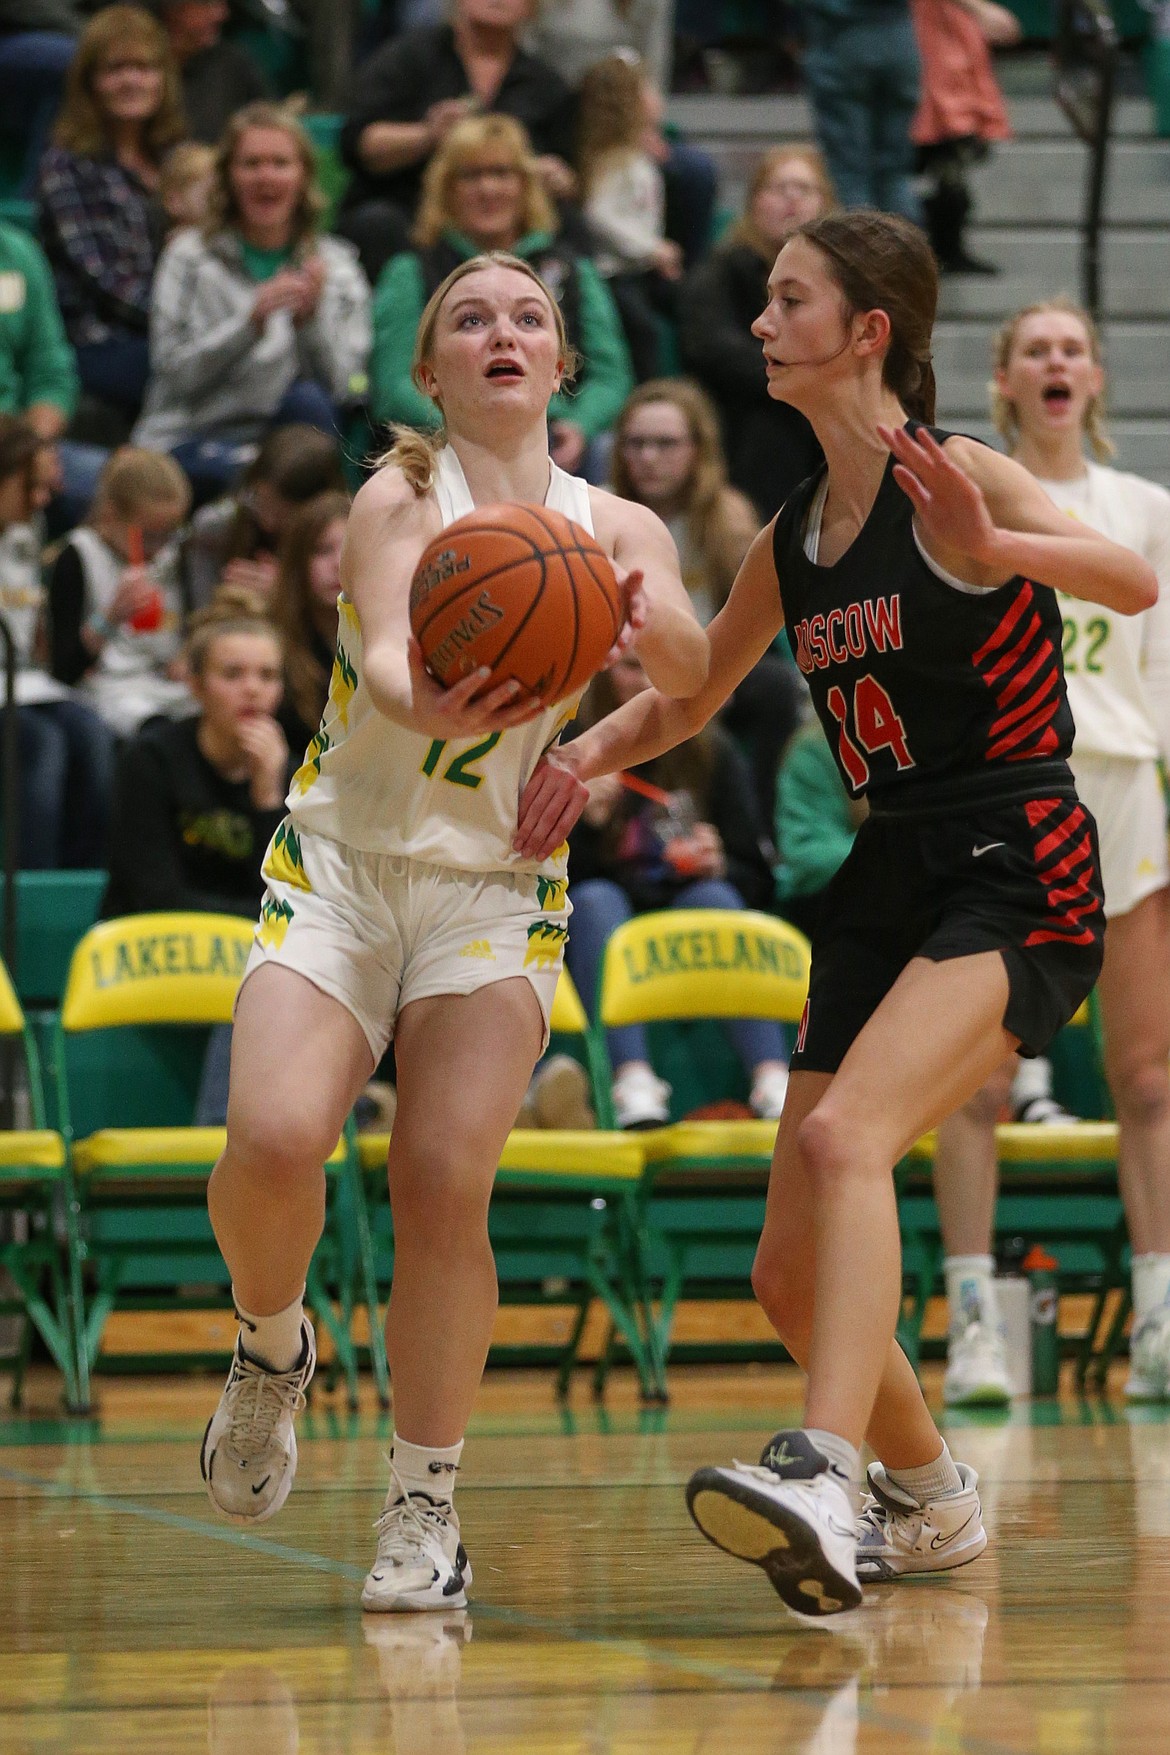 JASON DUCHOW PHOTOGRAPHY
Emily Knowles (12) of Lakeland puts up a scoop shot as Taylor McLuen (14) of Moscow defends Friday night at Hawk Court in Rathdrum.